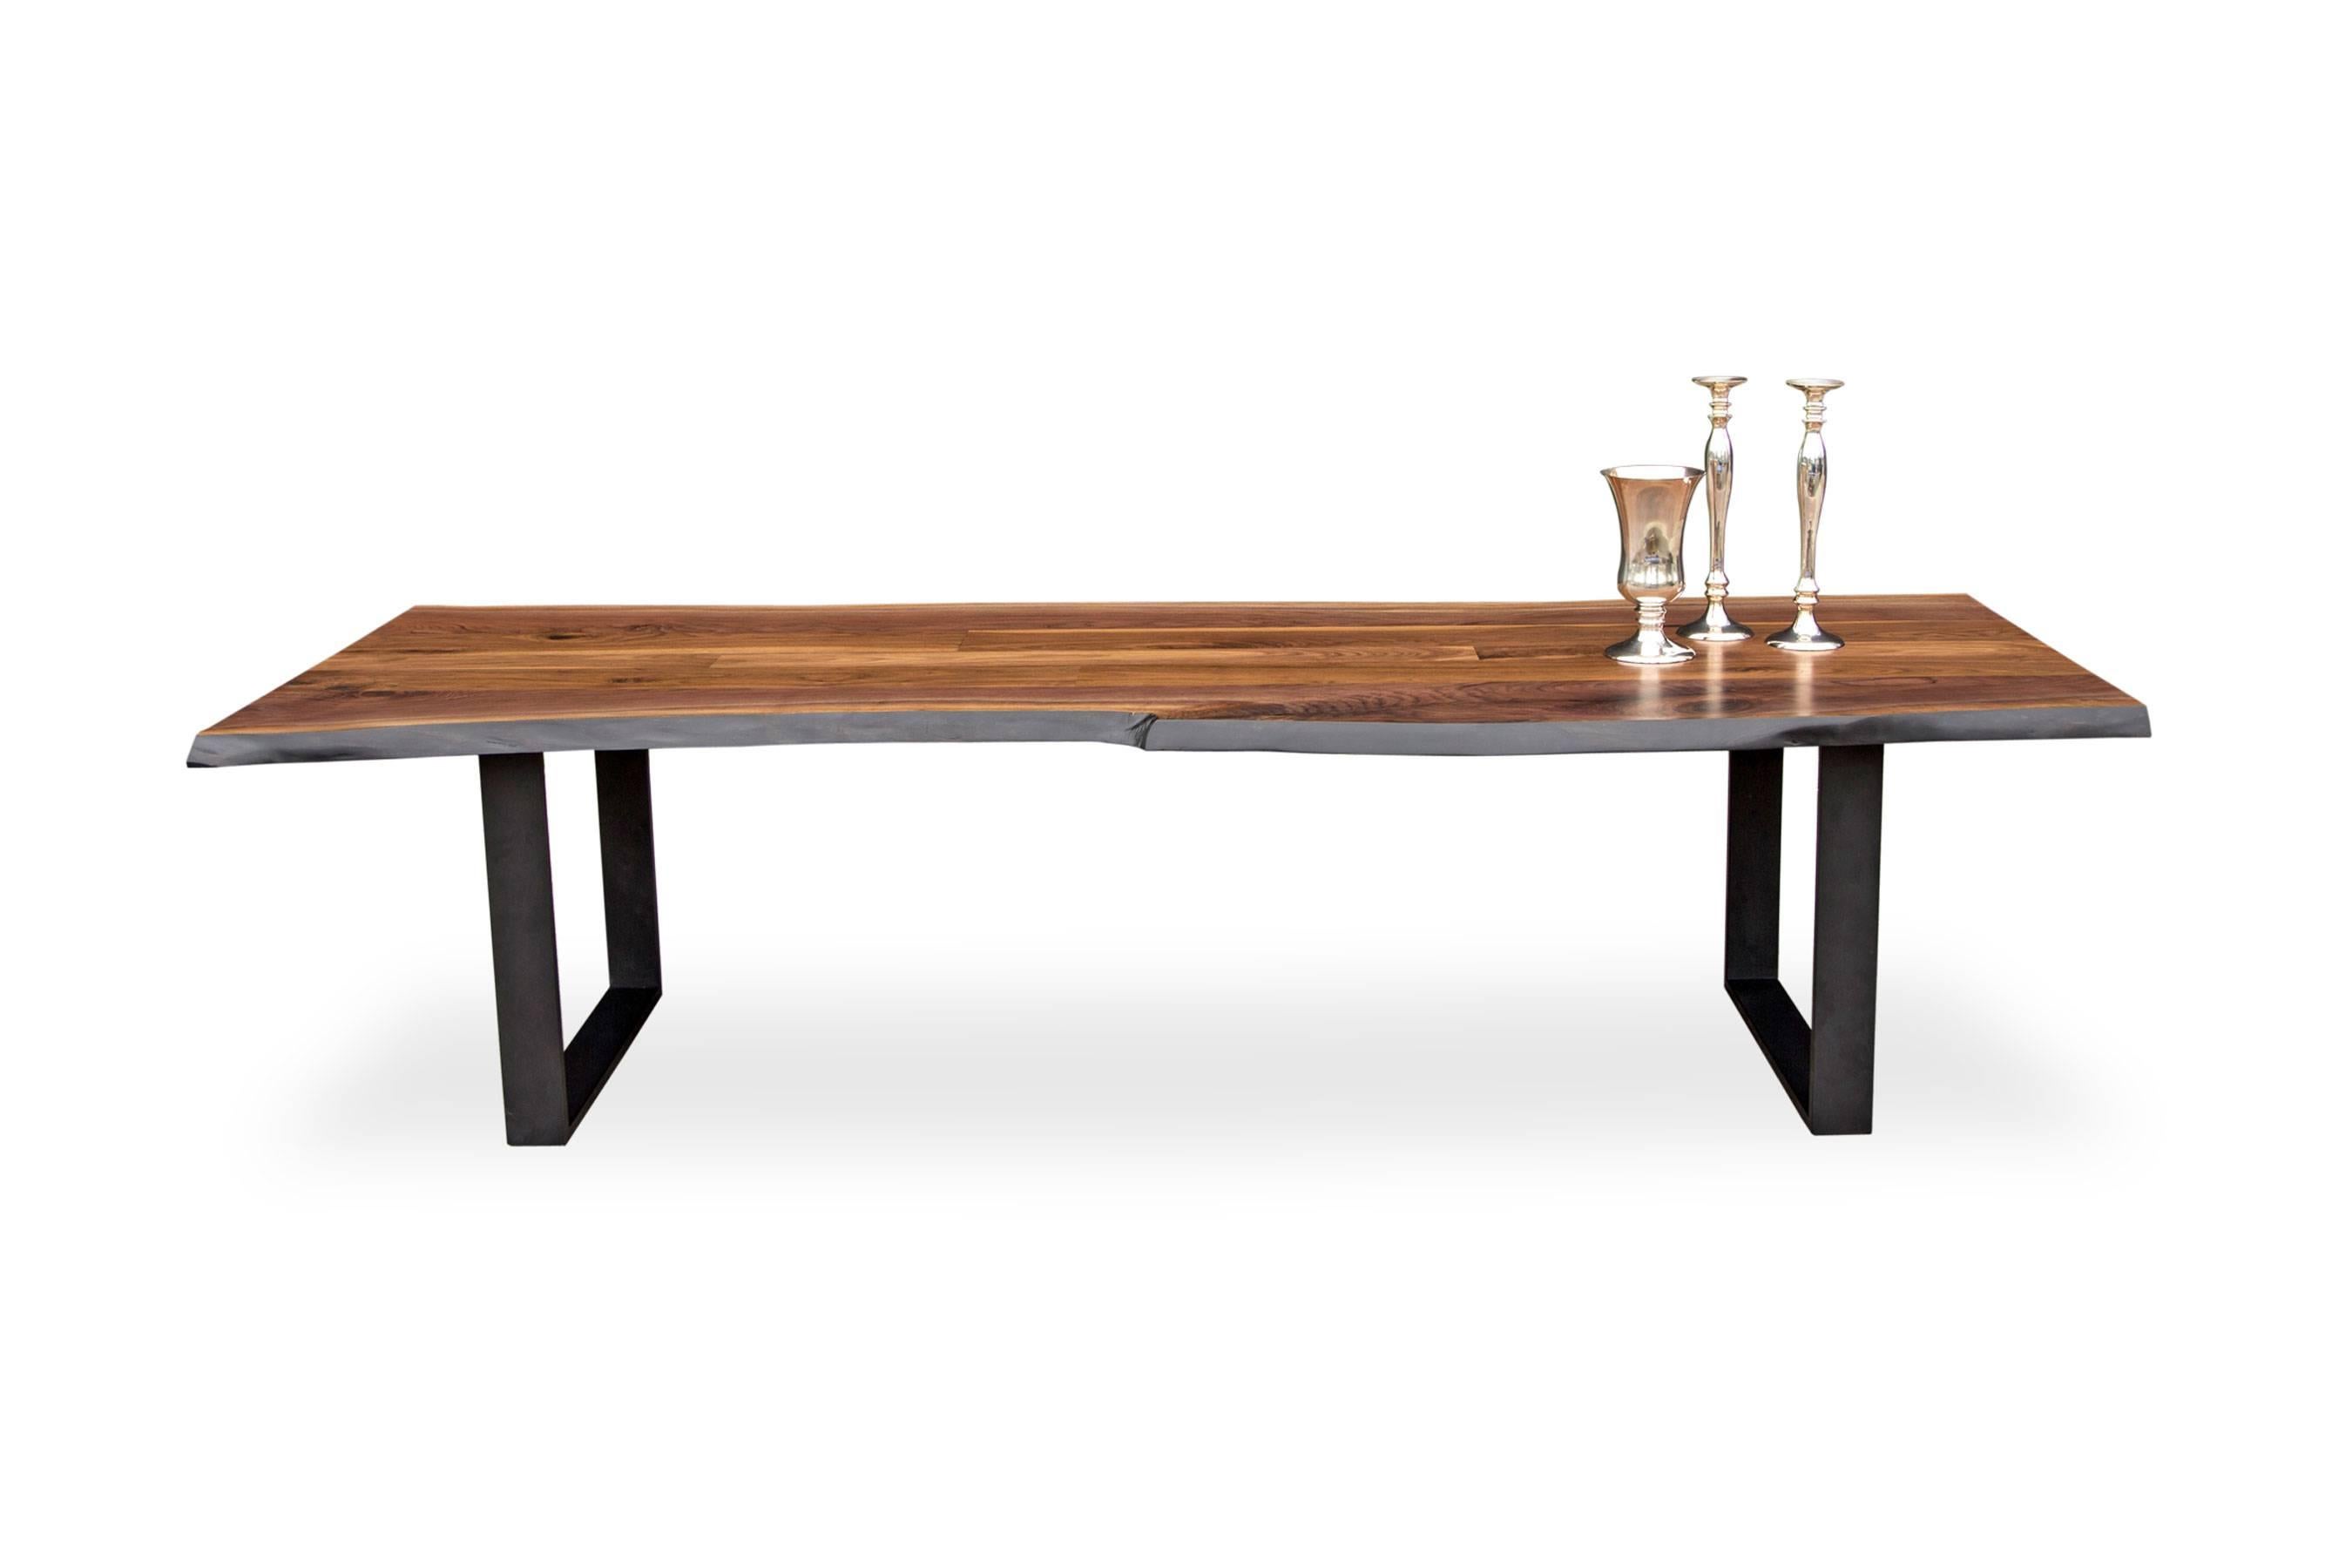 Solid American black walnut live edge tabletop paired with our solid blackened steel frame legs at 84 x 36 and 30 inches tall. 

Our tables let the walnut grain speak for itself with a durable clear coat finish over the wood and no stain. Our work